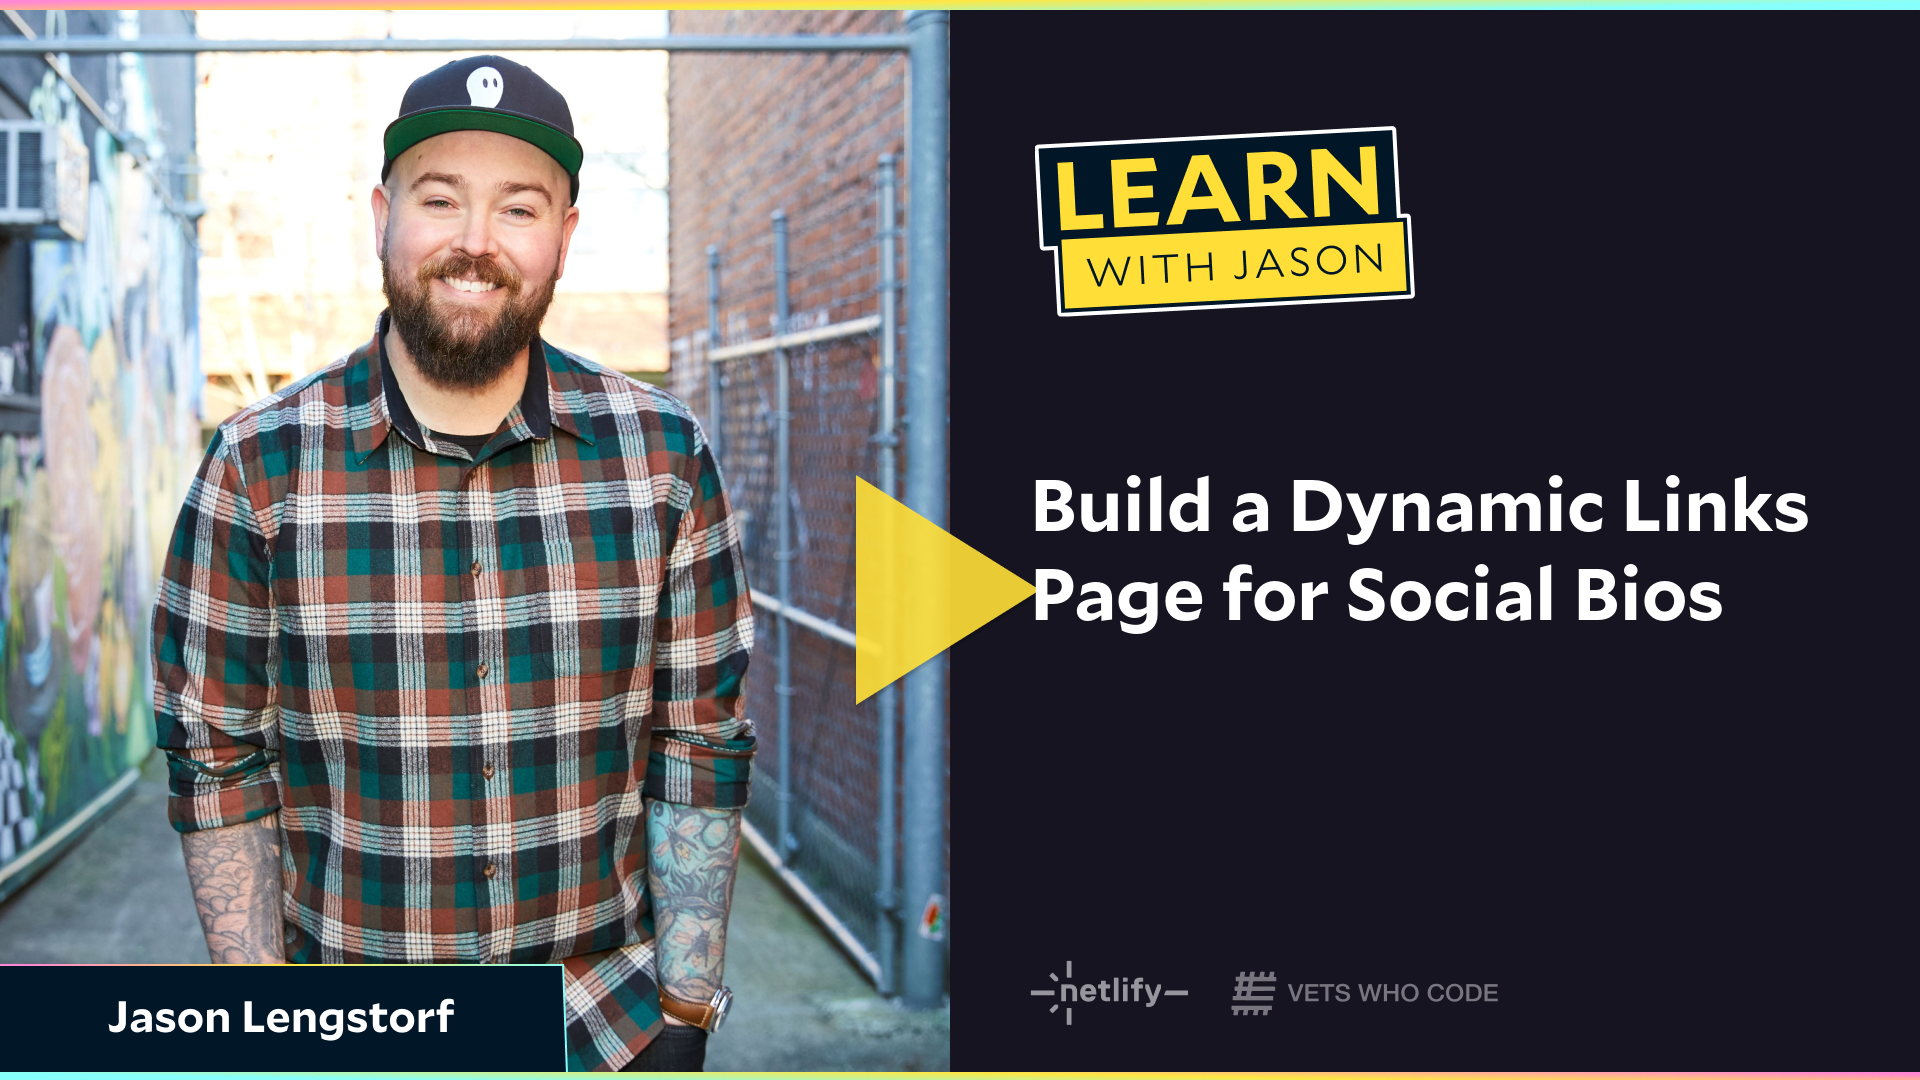 Build a Dynamic Links Page for Social Bios (with Jason Lengstorf)